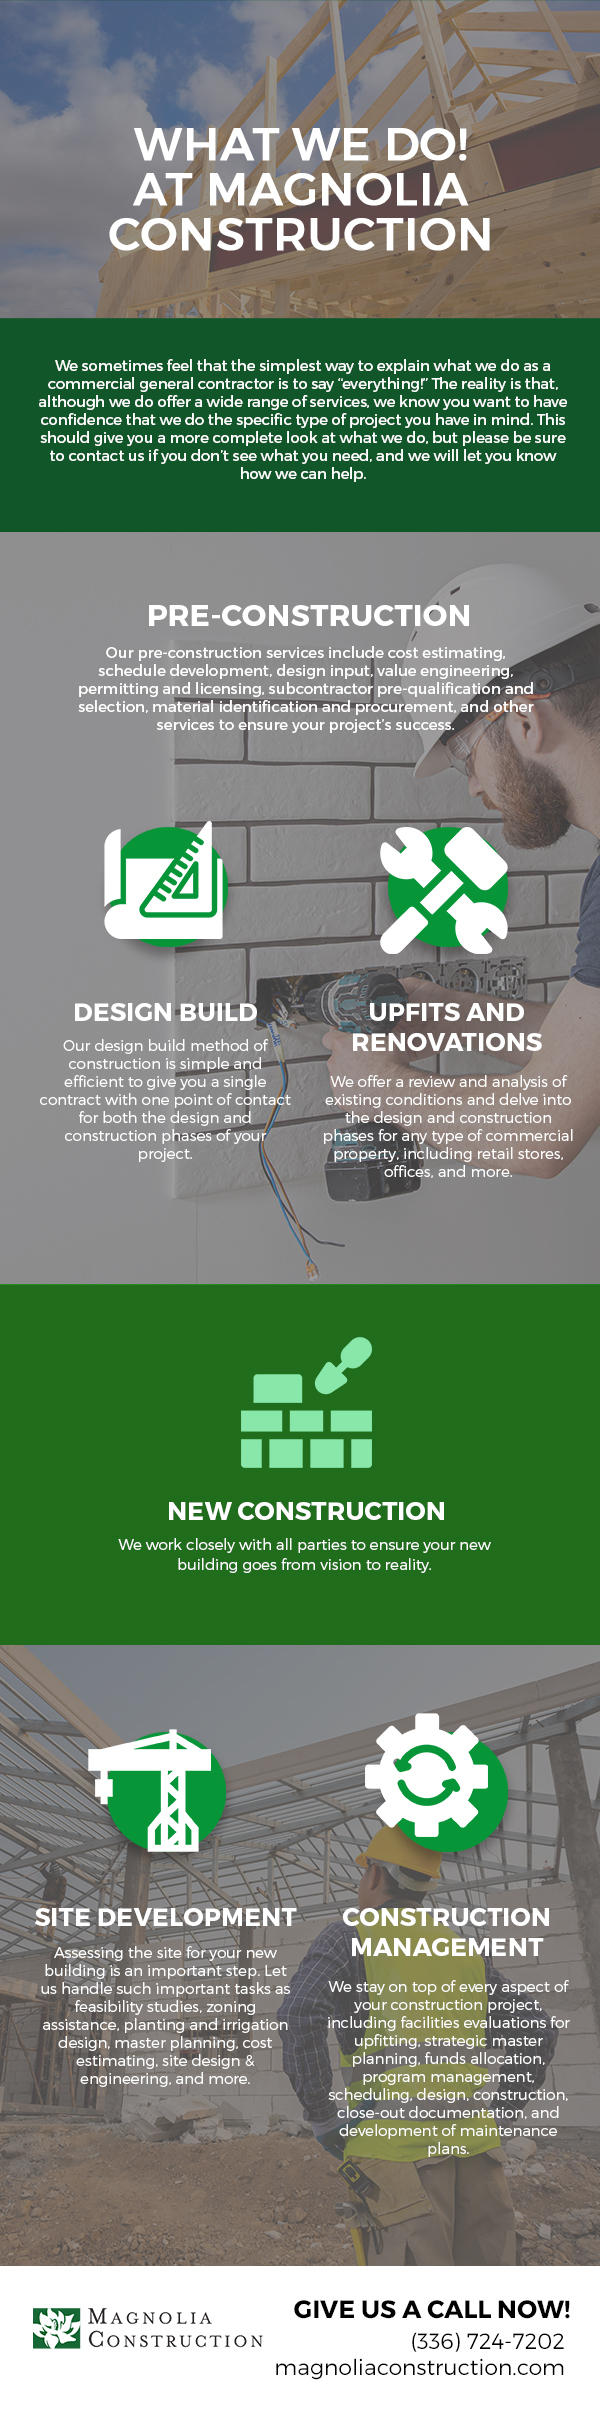 We offer a variety of services to help with your new construction project.